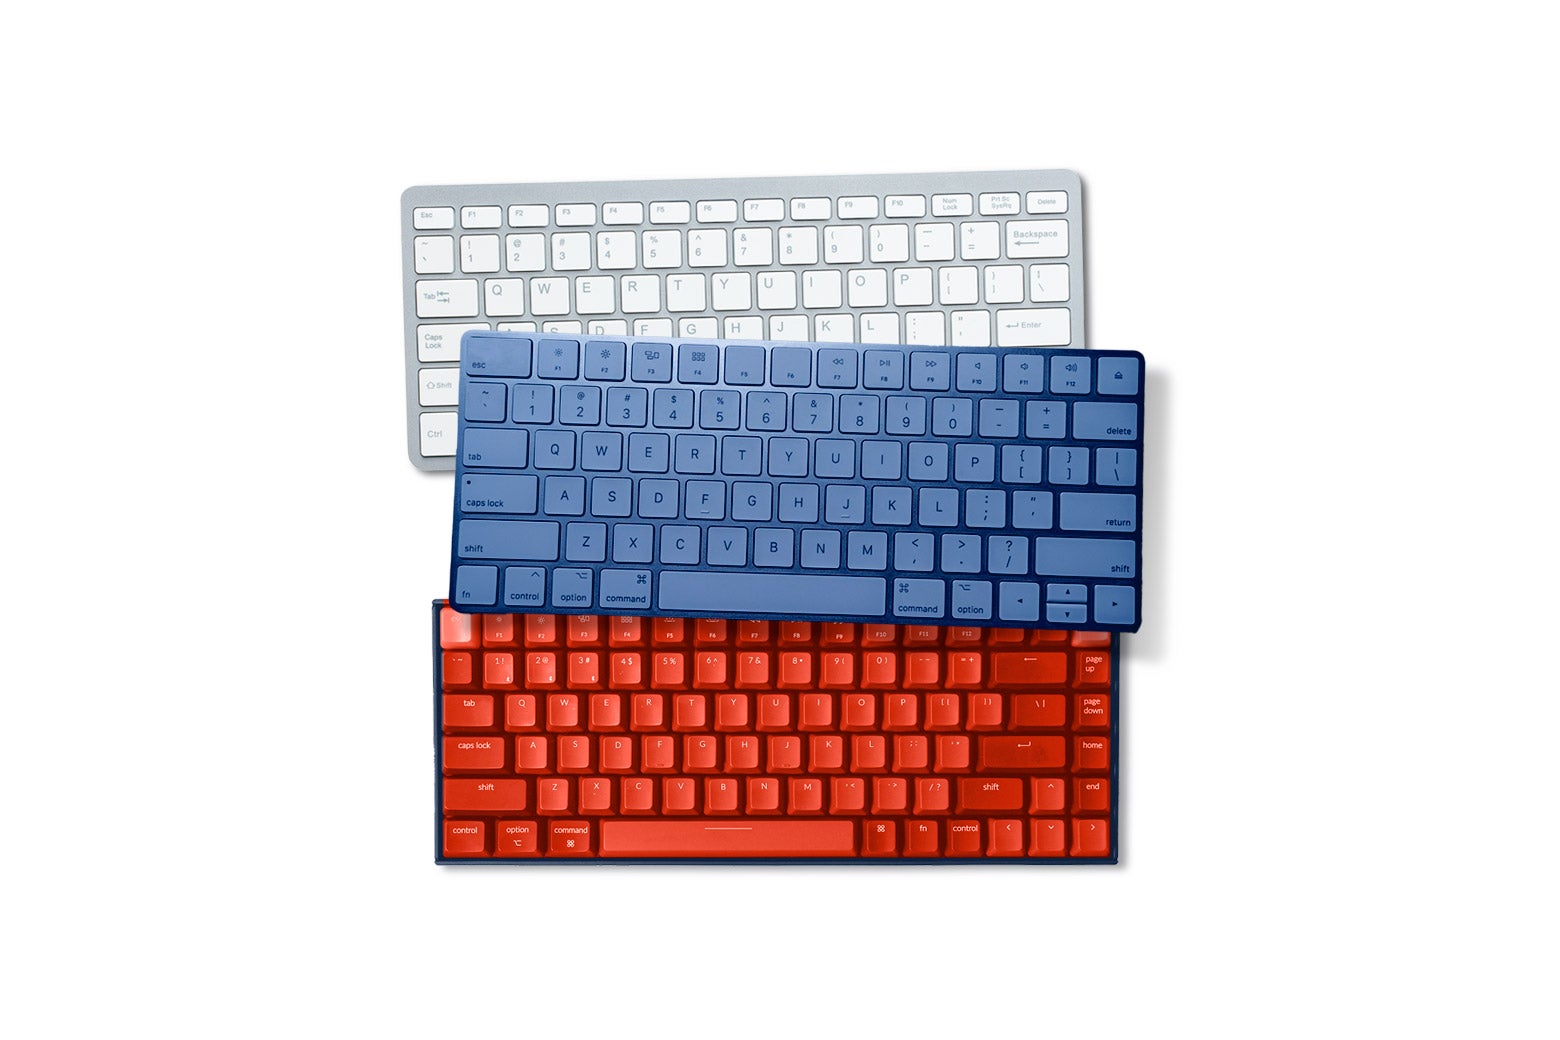 Three keyboards in different colors—white, blue, red—arranged to resemble the Russian flag.